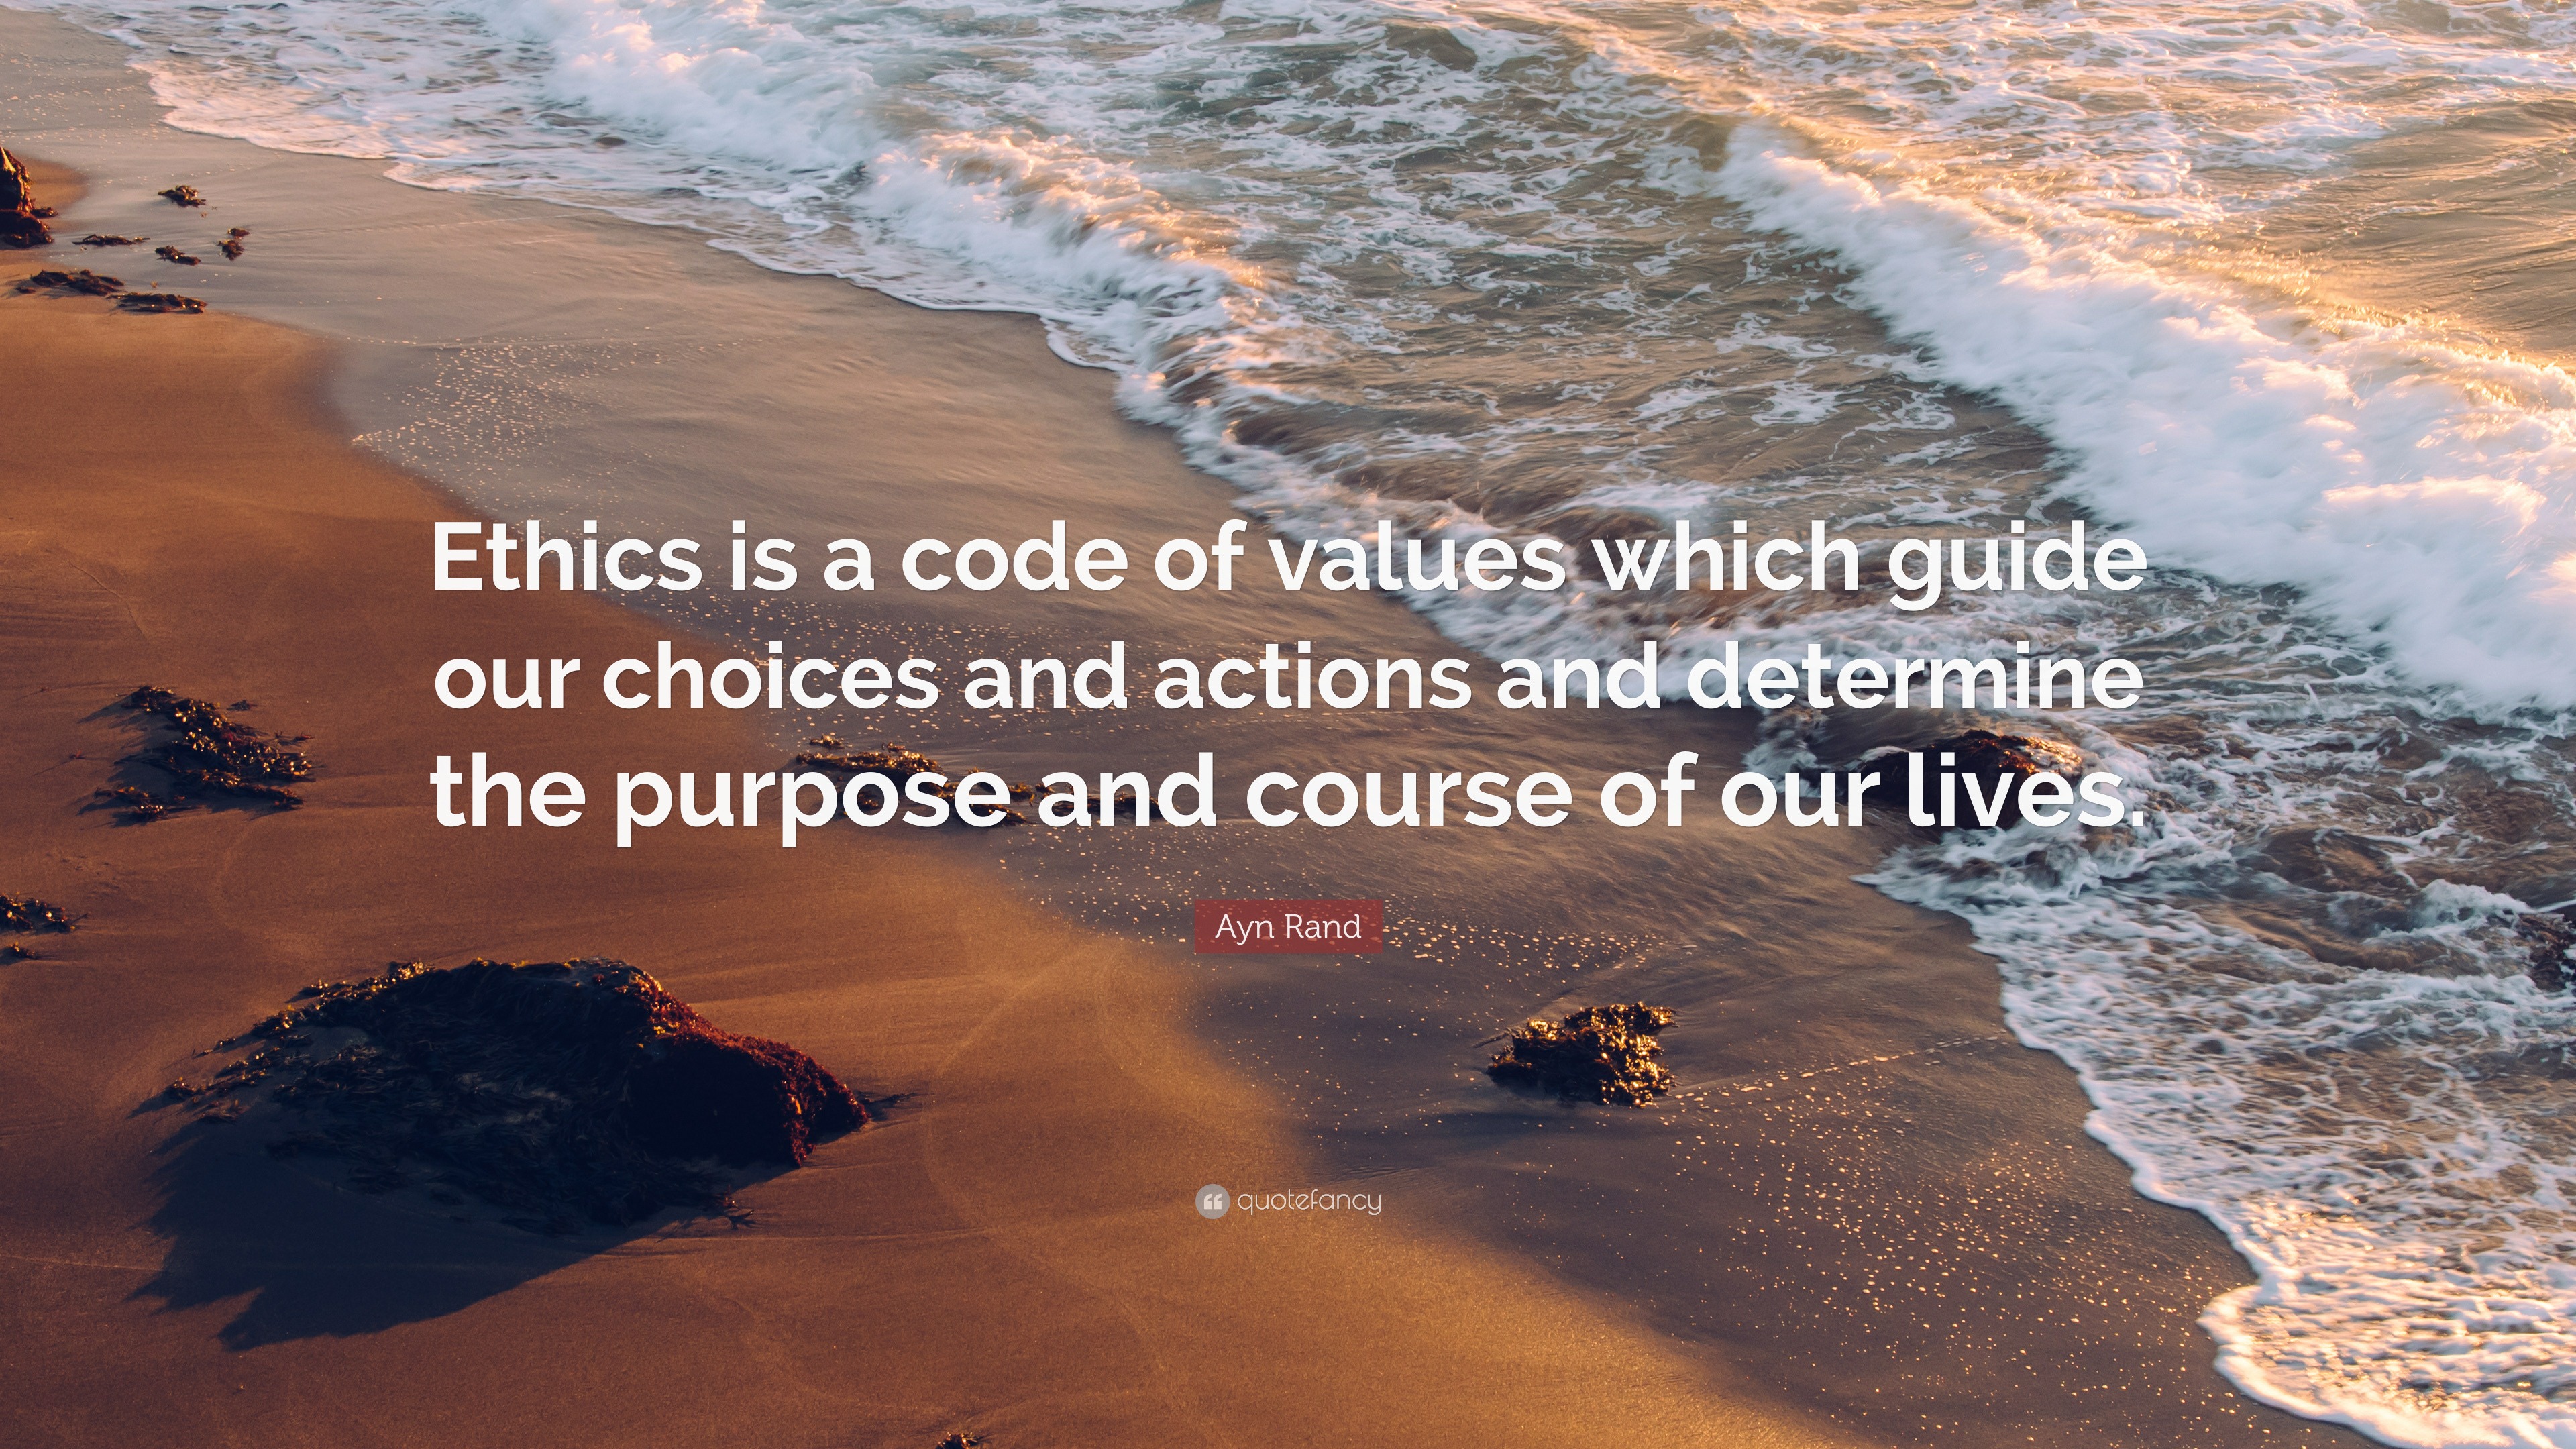 Ayn Rand Quote: “Ethics is a code of values which guide our choices and